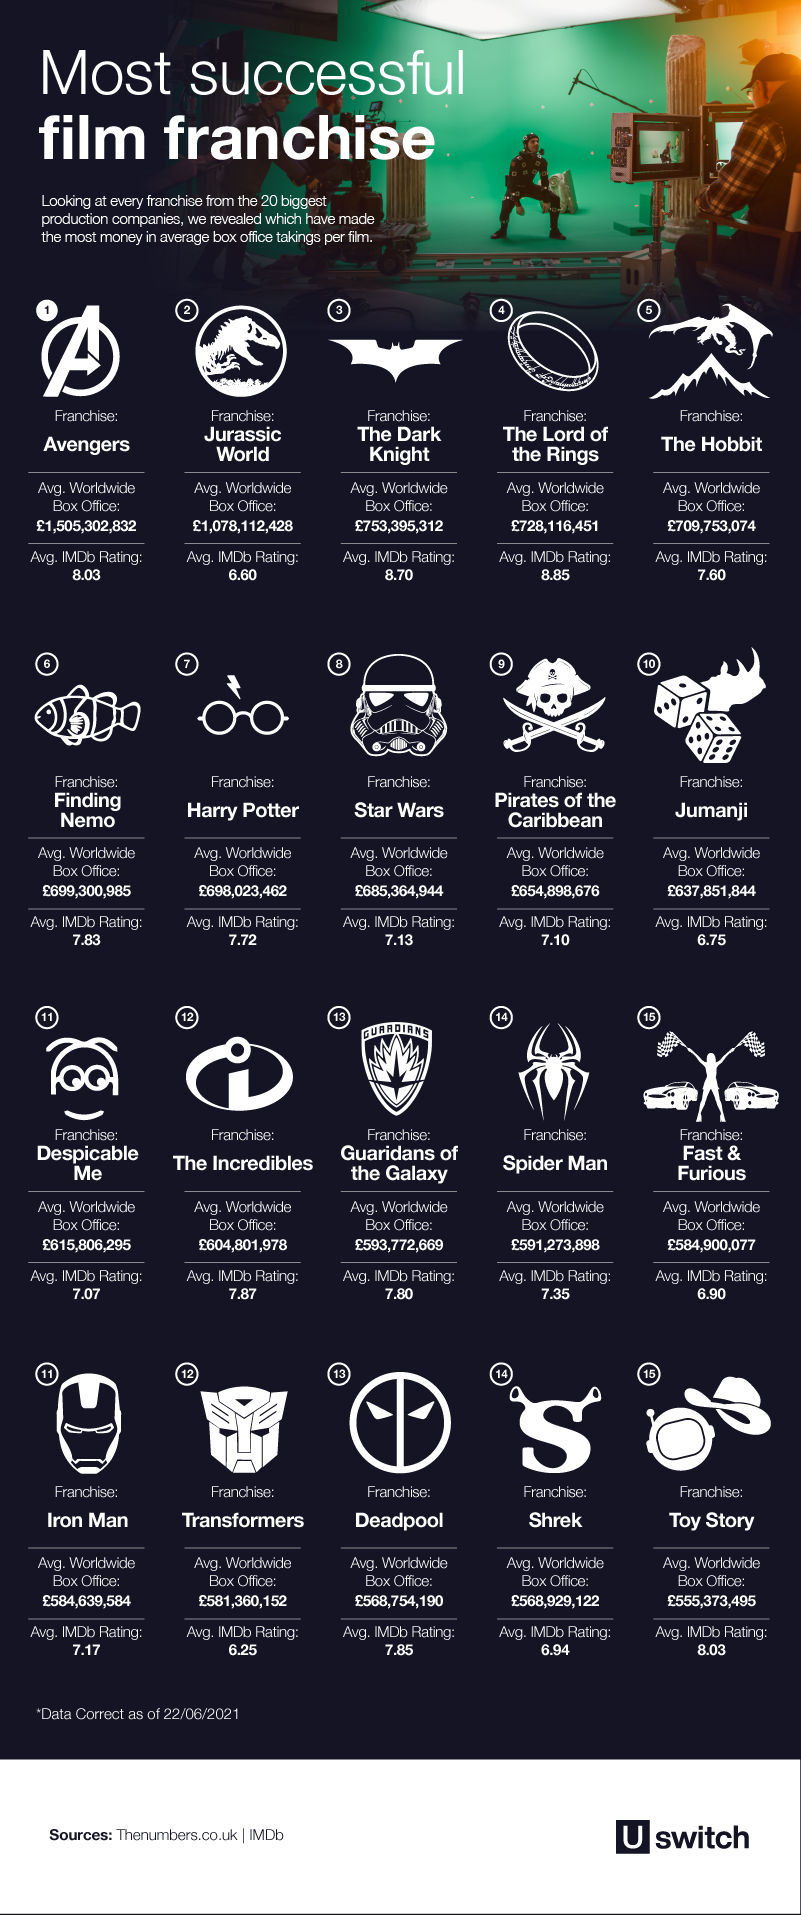 Infographic of every Star Wars movie ranked by fans on IMDb and